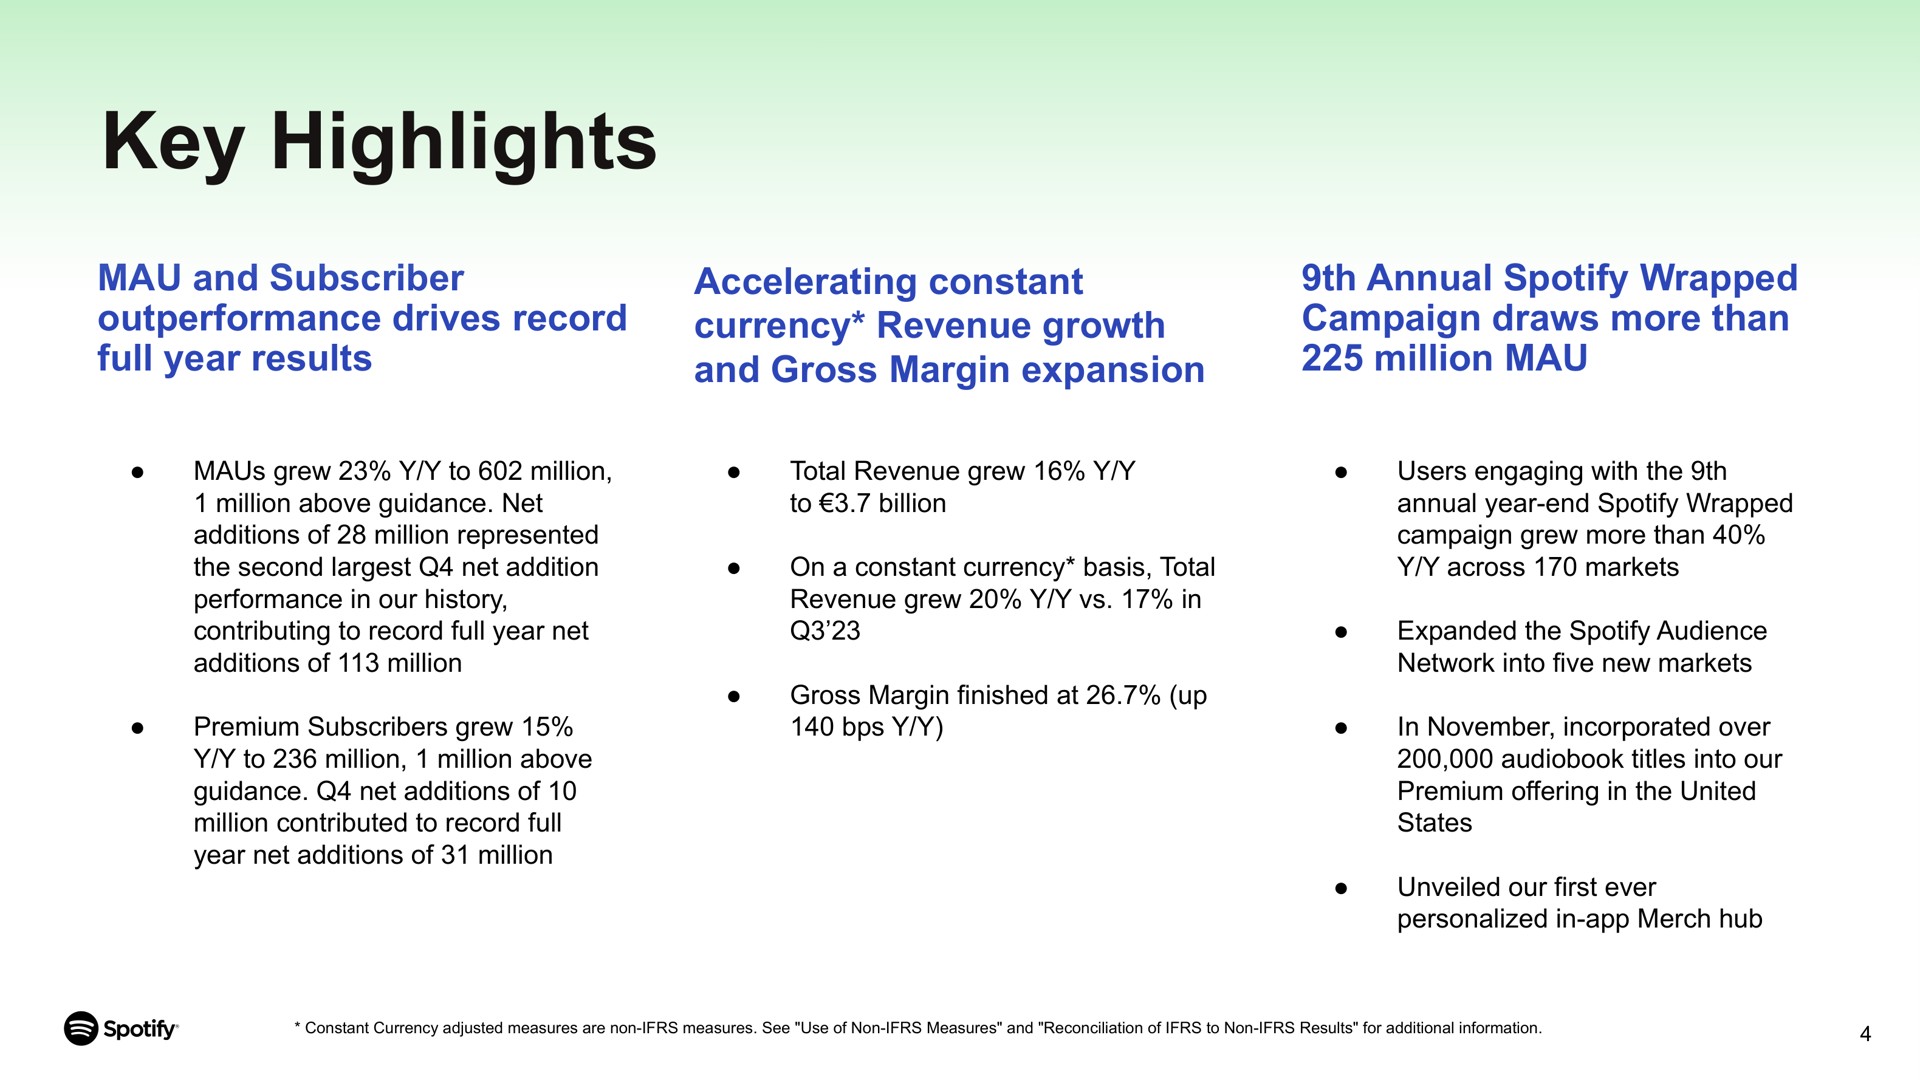 key highlights mau and subscriber drives record full year results accelerating constant currency revenue growth and gross margin expansion annual wrapped campaign draws more than million mau grew to above guidance net additions of represented the second net addition contributing to net additions of premium subscribers grew guidance net additions of net additions of total grew to billion on a basis total grew in finished at up users engaging with the year end grew across markets expanded the audience in incorporated over titles into our premium offering in the united states personalized in merch hub | Spotify